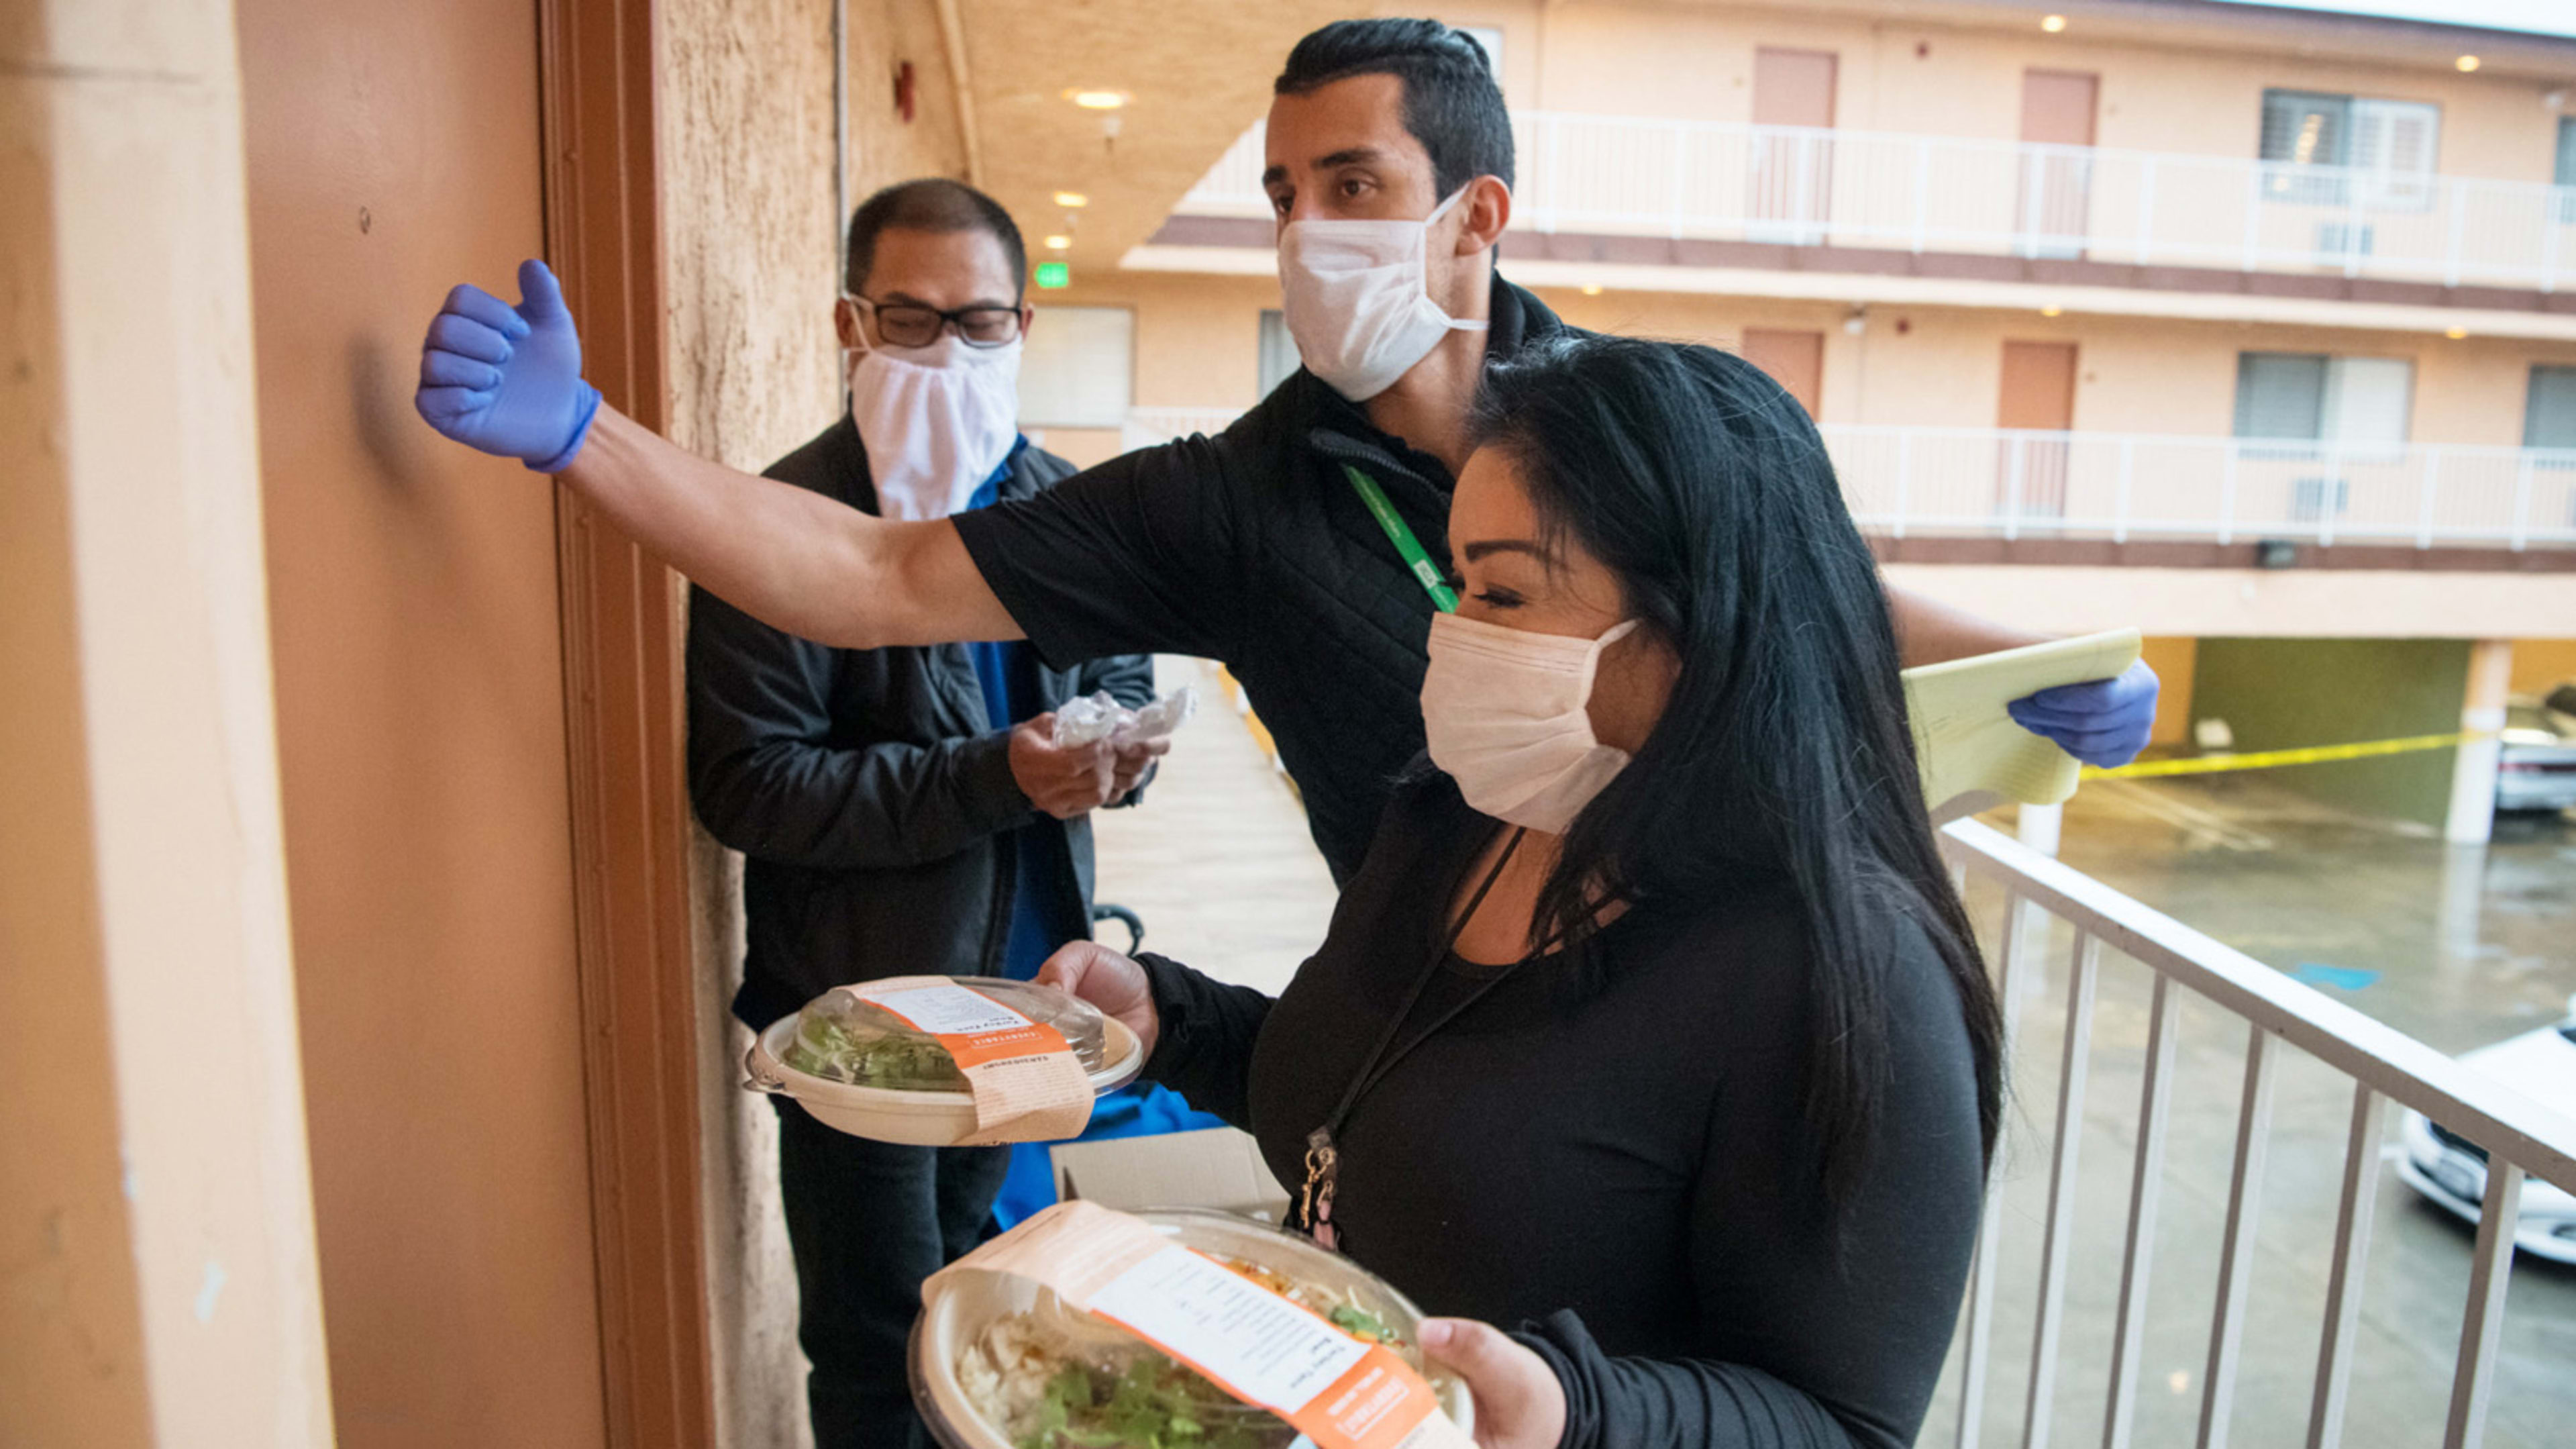 How this Los Angeles healthy restaurant chain pivoted to emergency relief